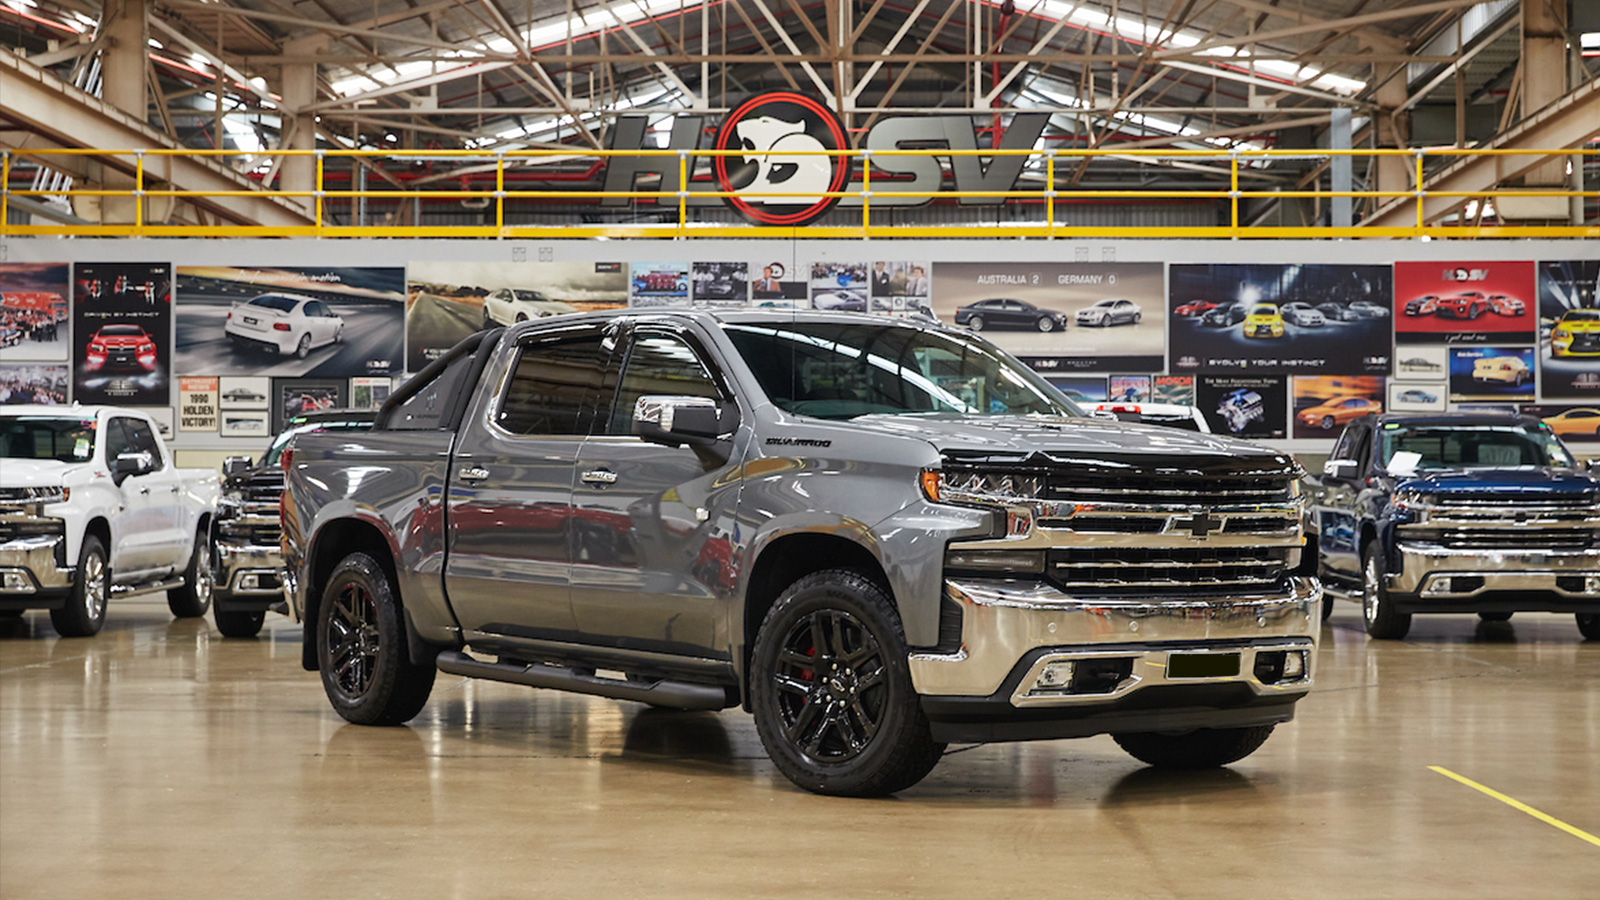 WAG will continue to re-manufacture the Chevrolet Silverado range at our Clayton, Victoria premises.